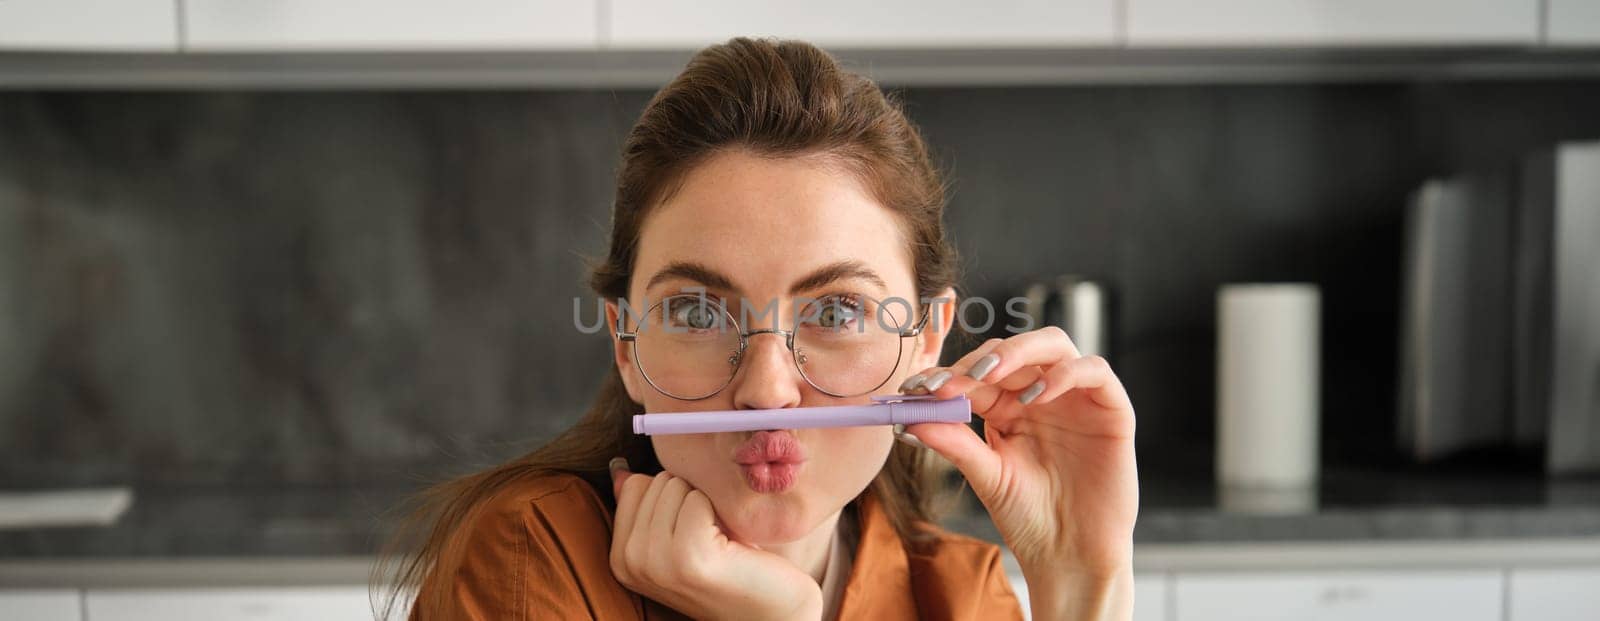 Close up portrait of funny, silly young woman, playing with pen, holding pencil on top of her lip and grimacing, sitting in kitchen.